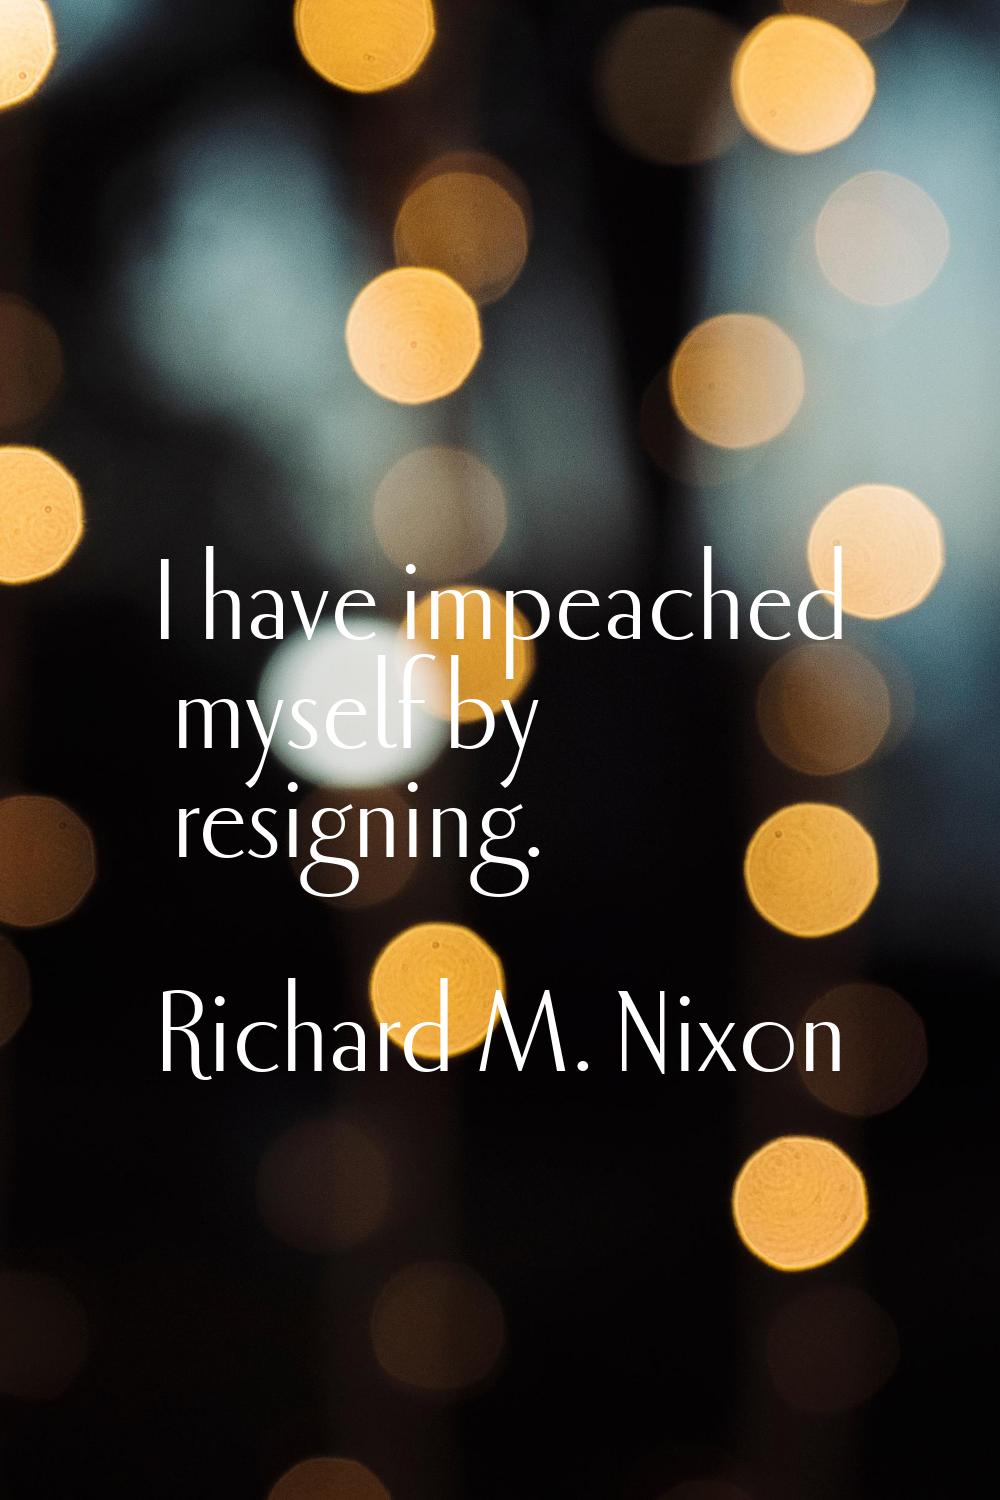 I have impeached myself by resigning.